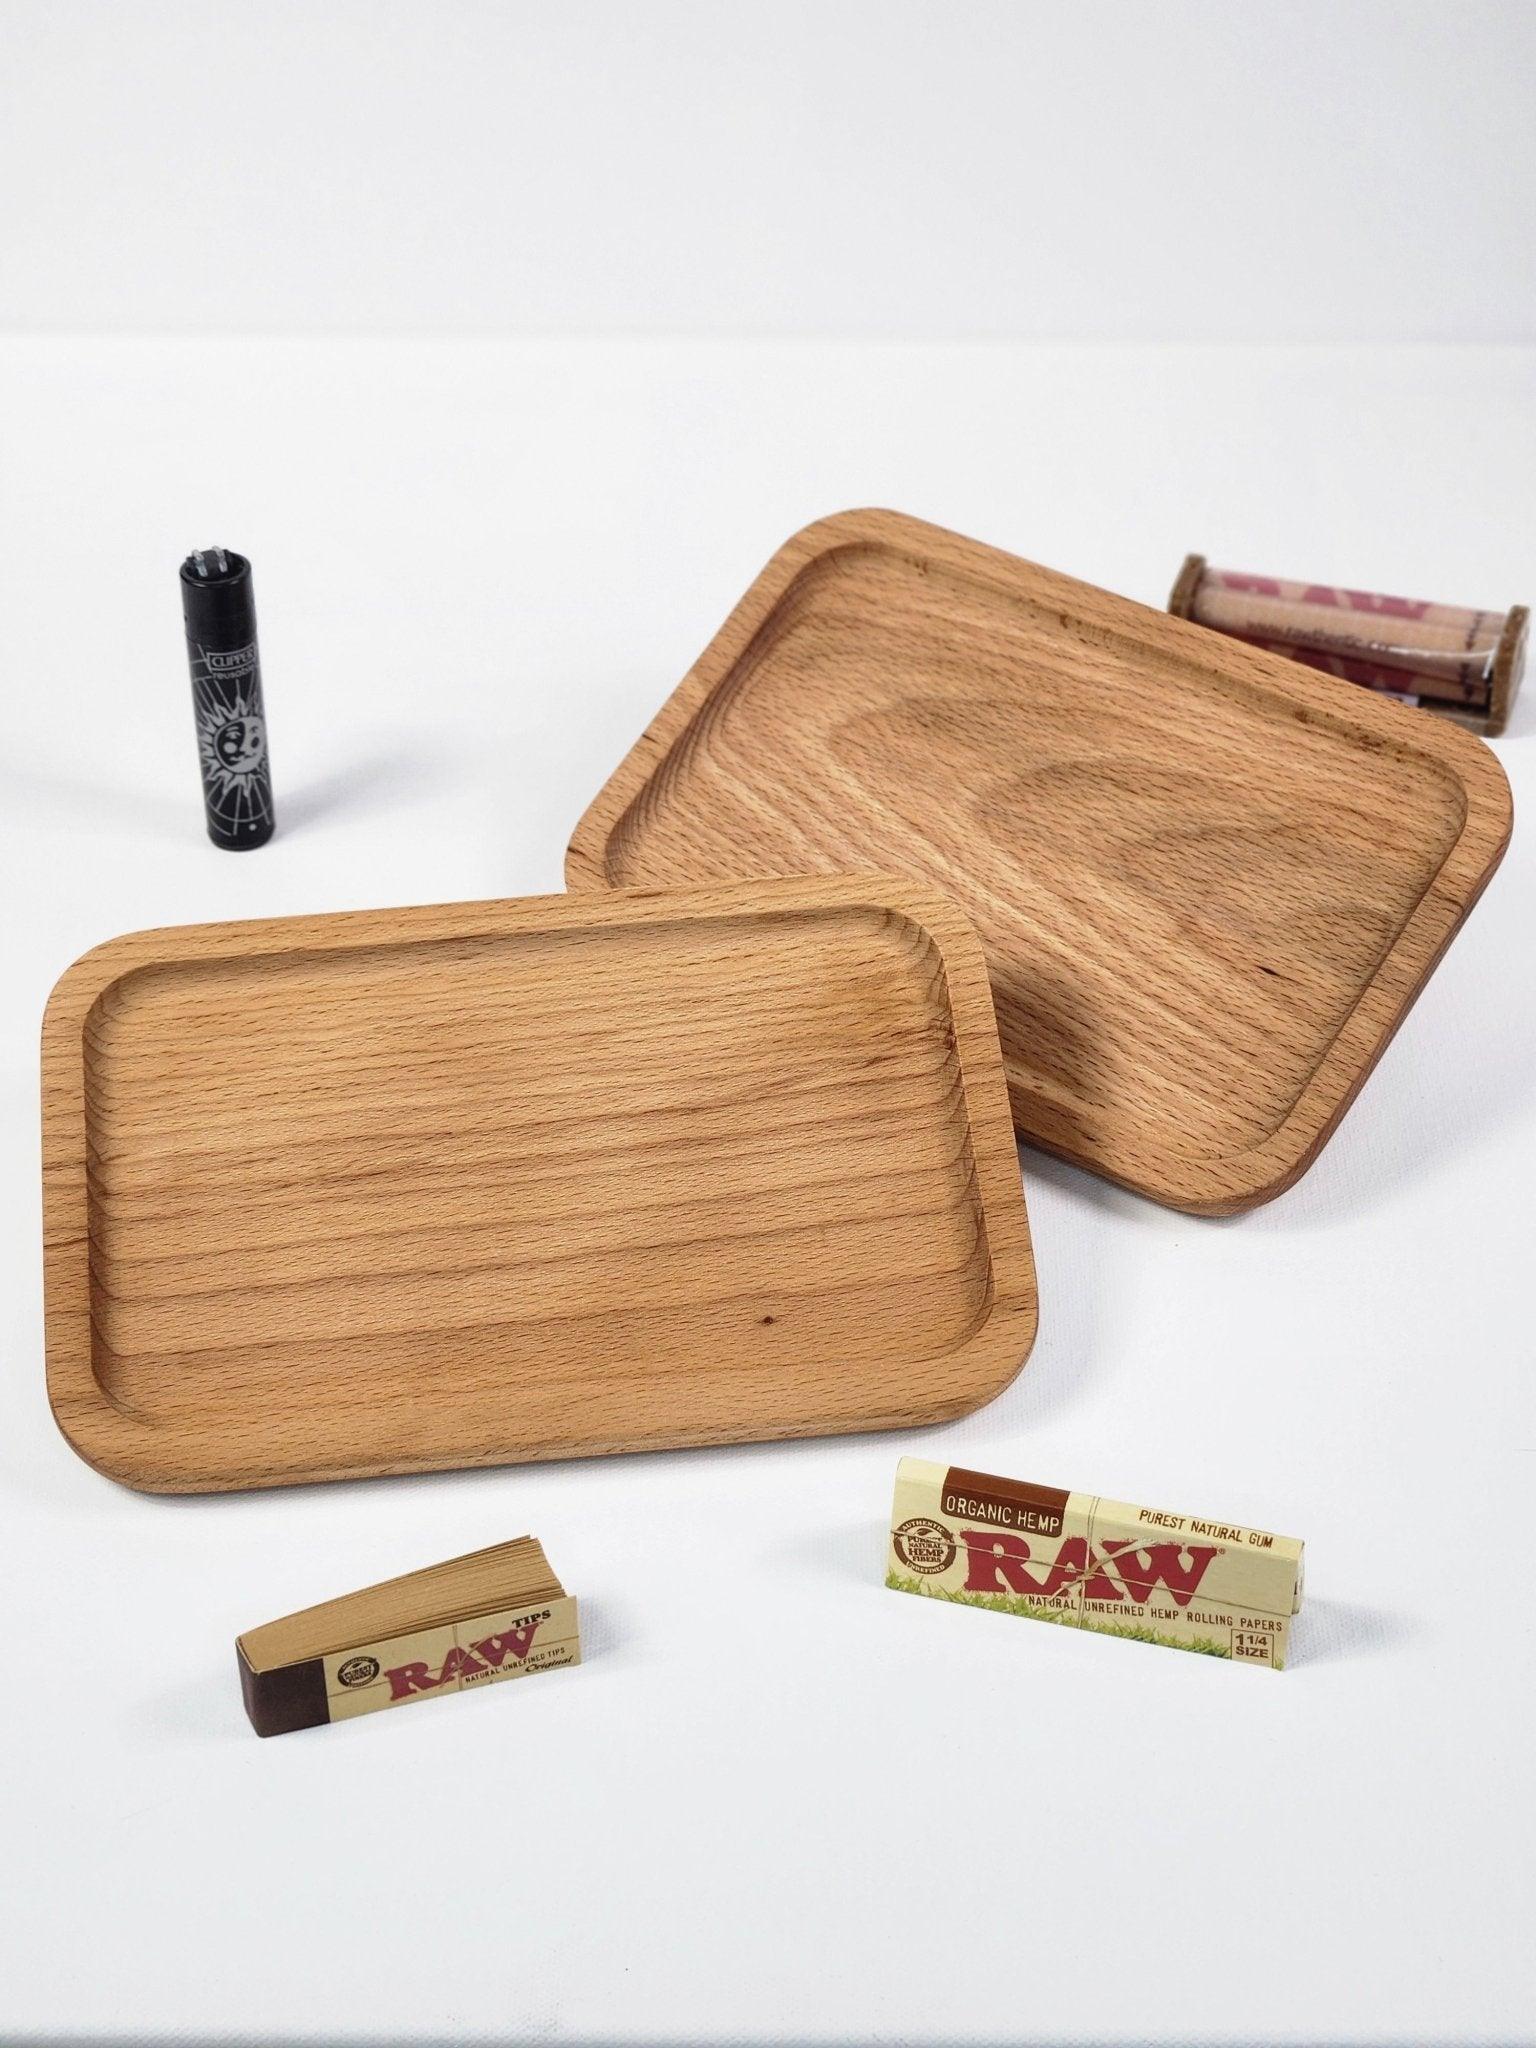 Sunflower/Weed Leaf Rolling Tray - The Bud Butler